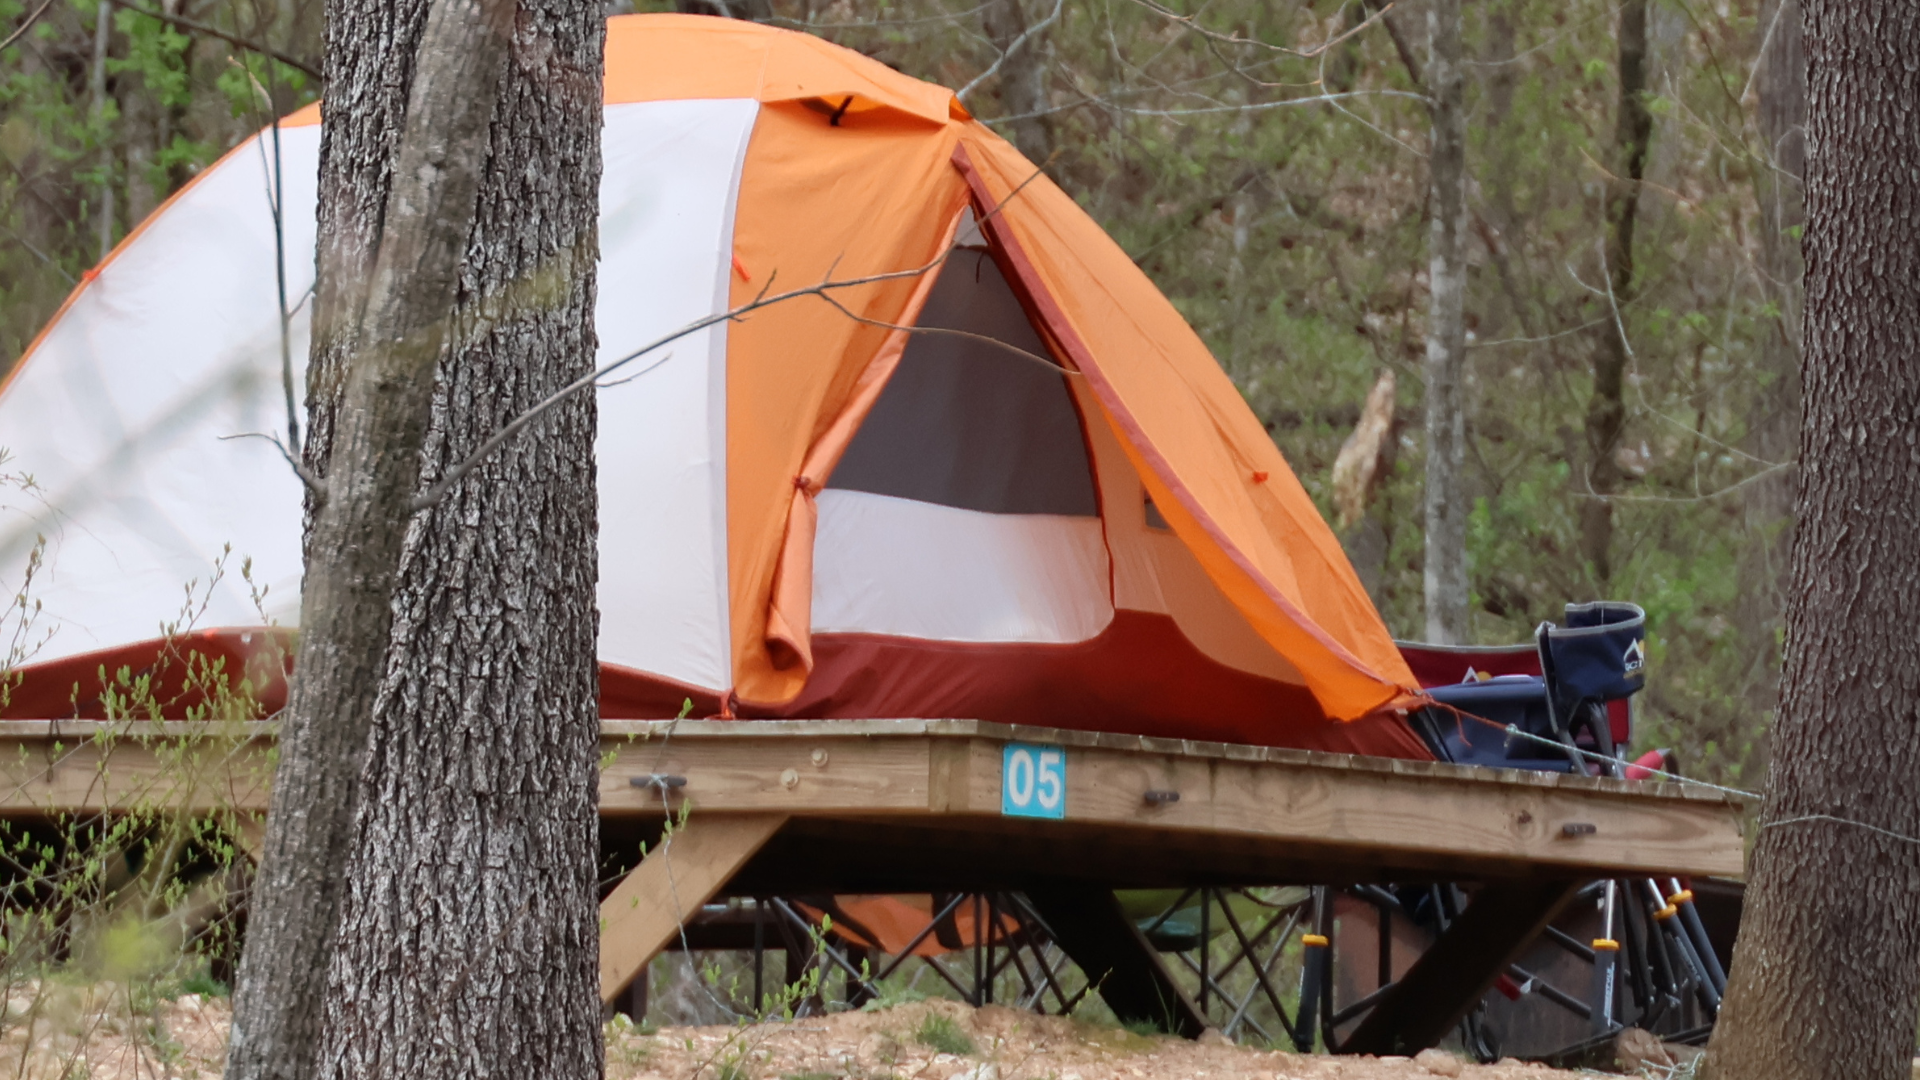 Orange camping tent on a wooden platform in the woods